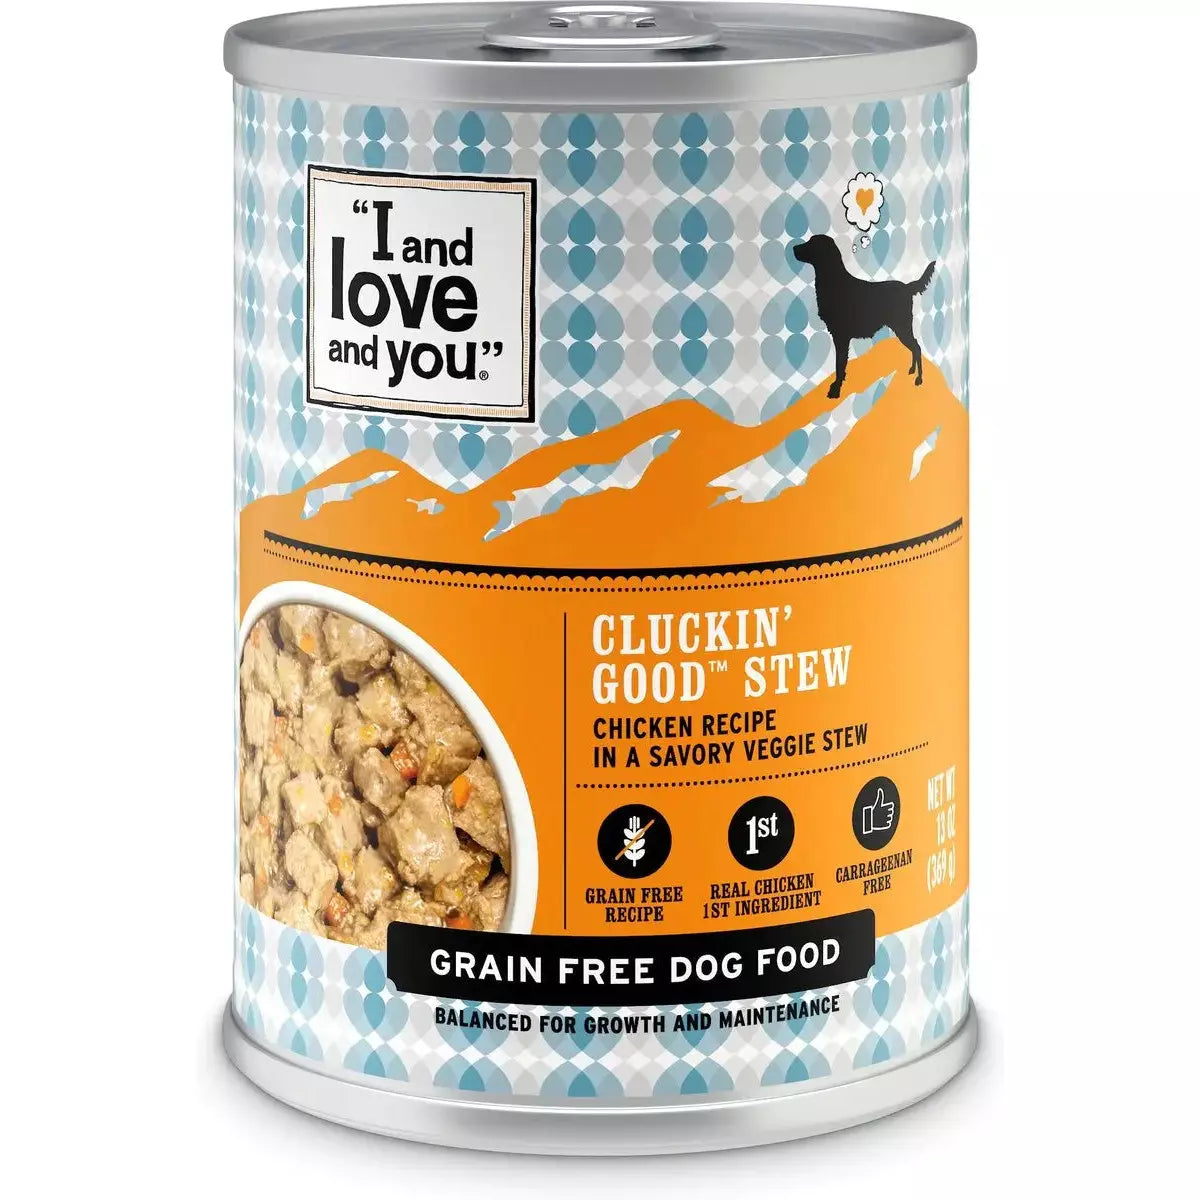 I and Love and You Cluckin' Good Stew Grain-Free Canned Dog Food 13 OZ CAN (12 PACK) I and Love and You